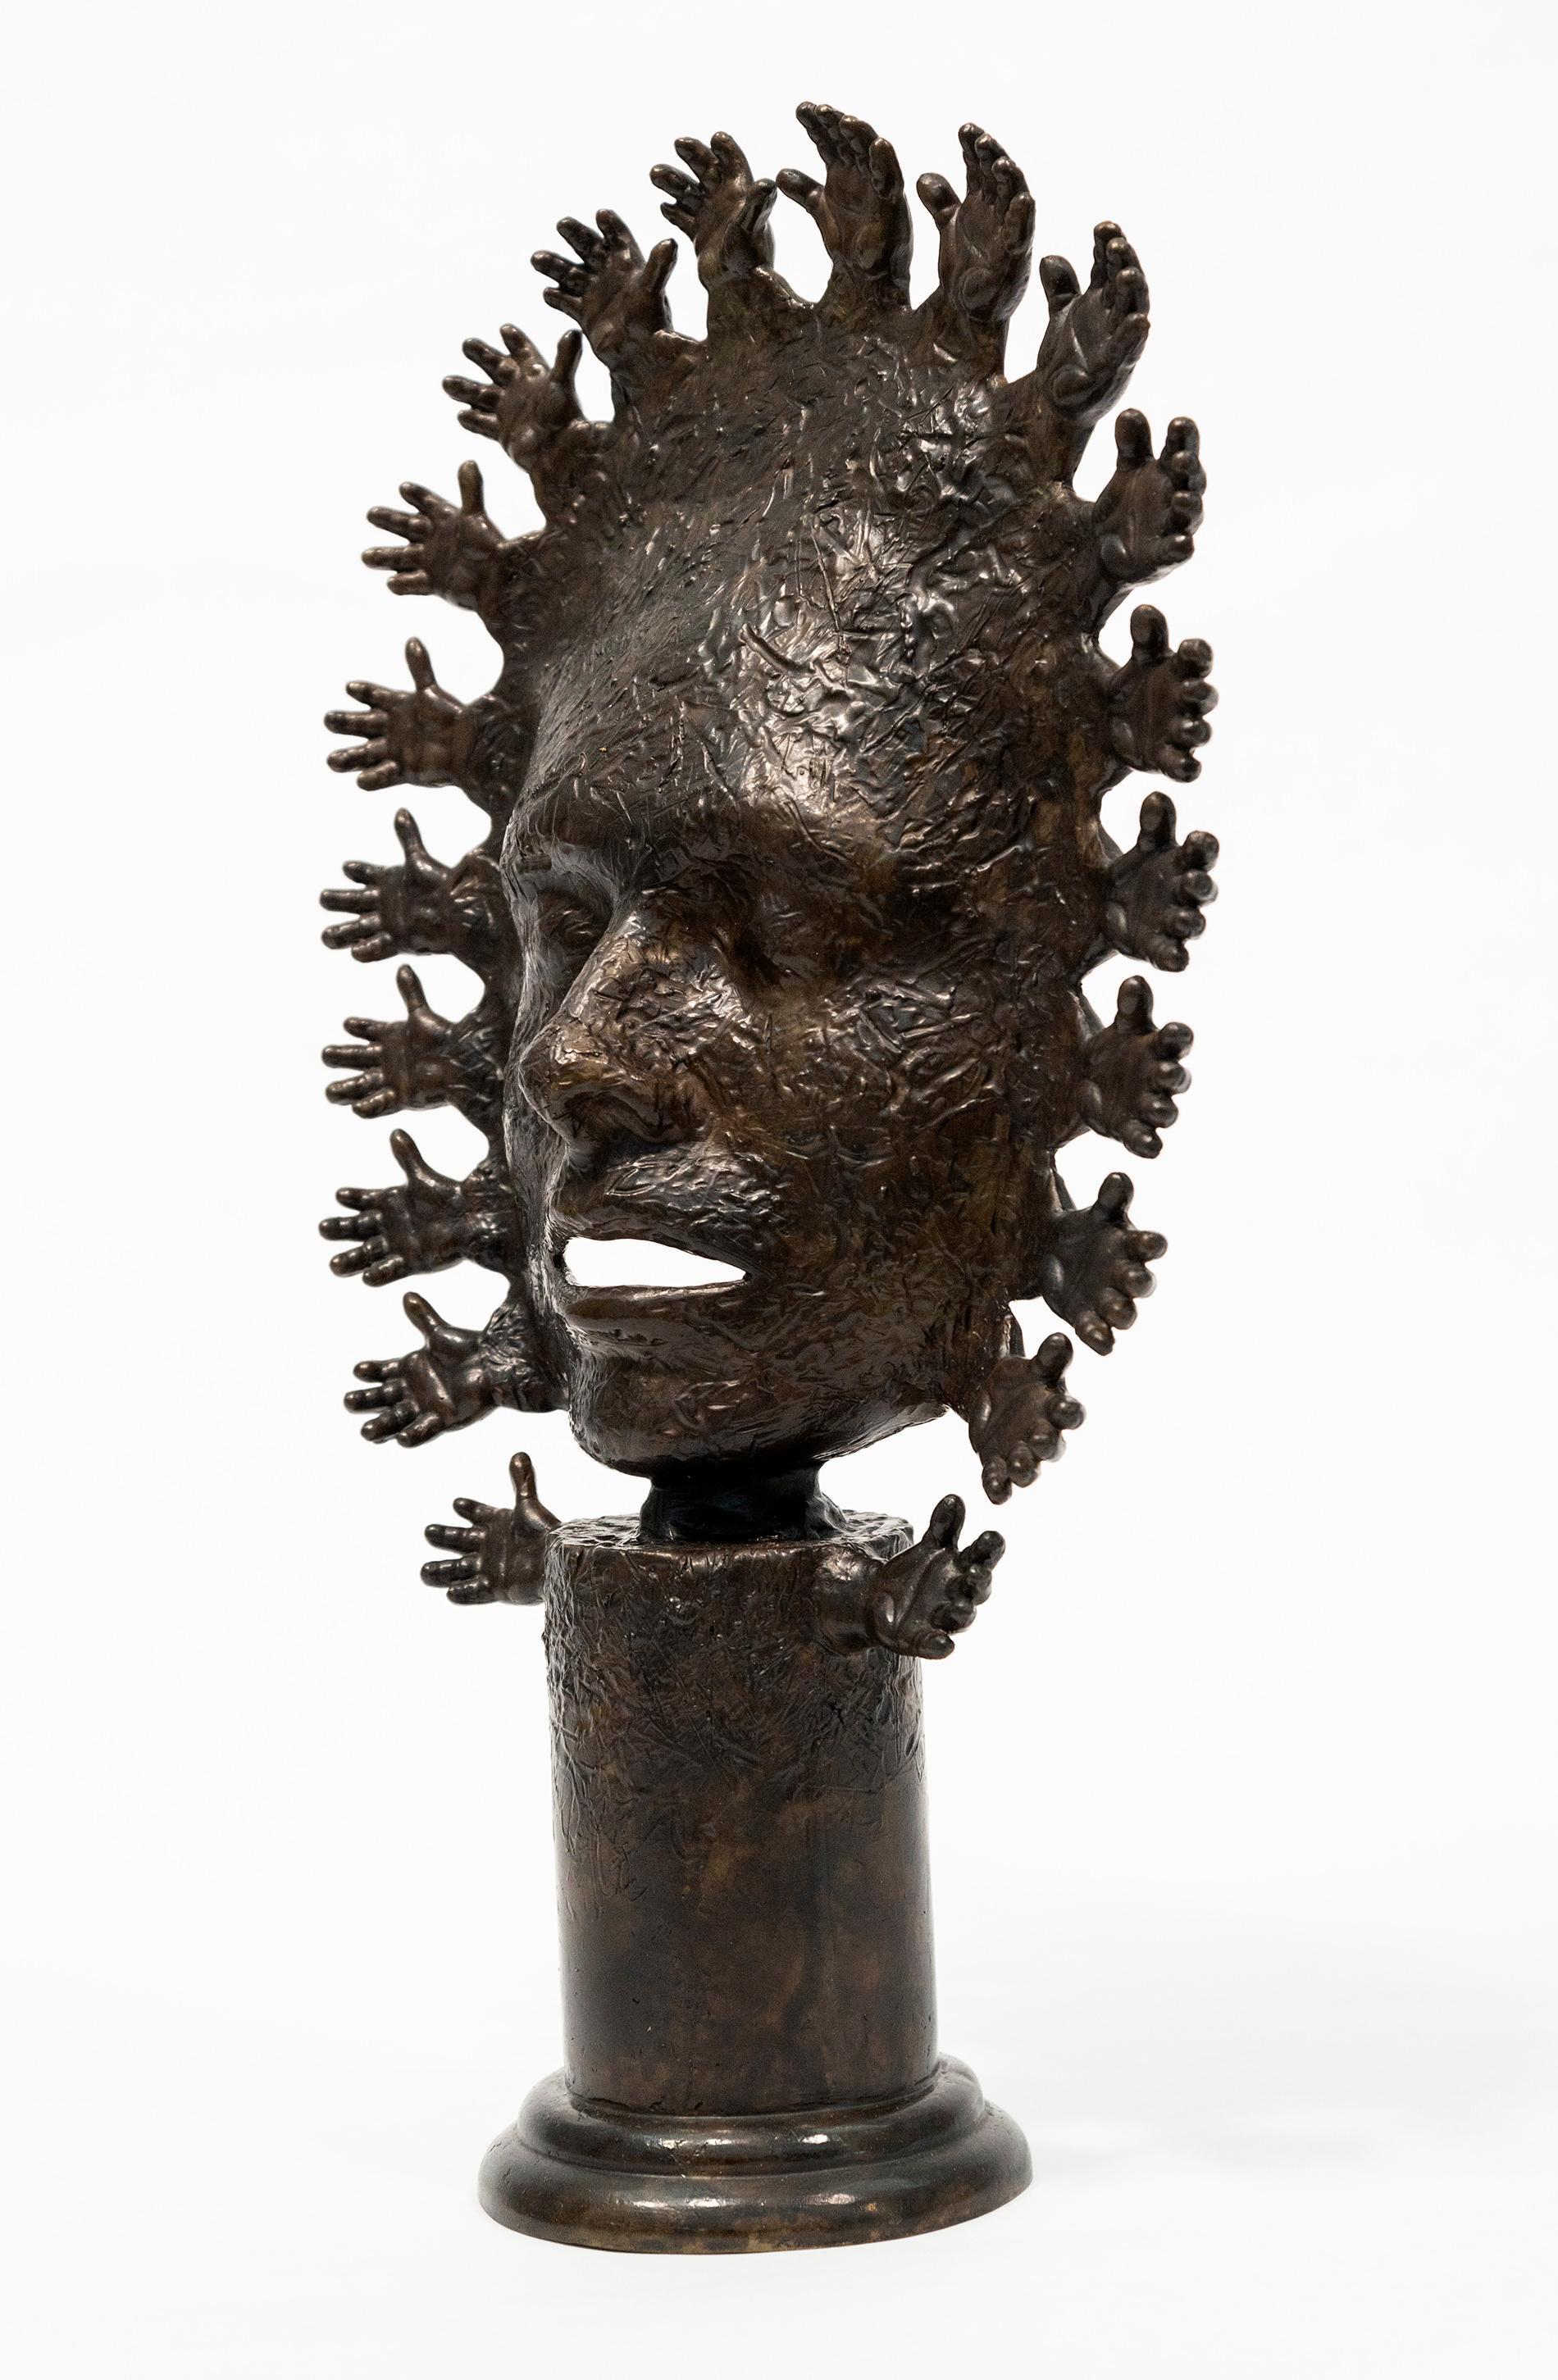 Benediction - figurative, face, hands, mask, tribal, cast bronze sculpture - Contemporary Sculpture by Dale Dunning